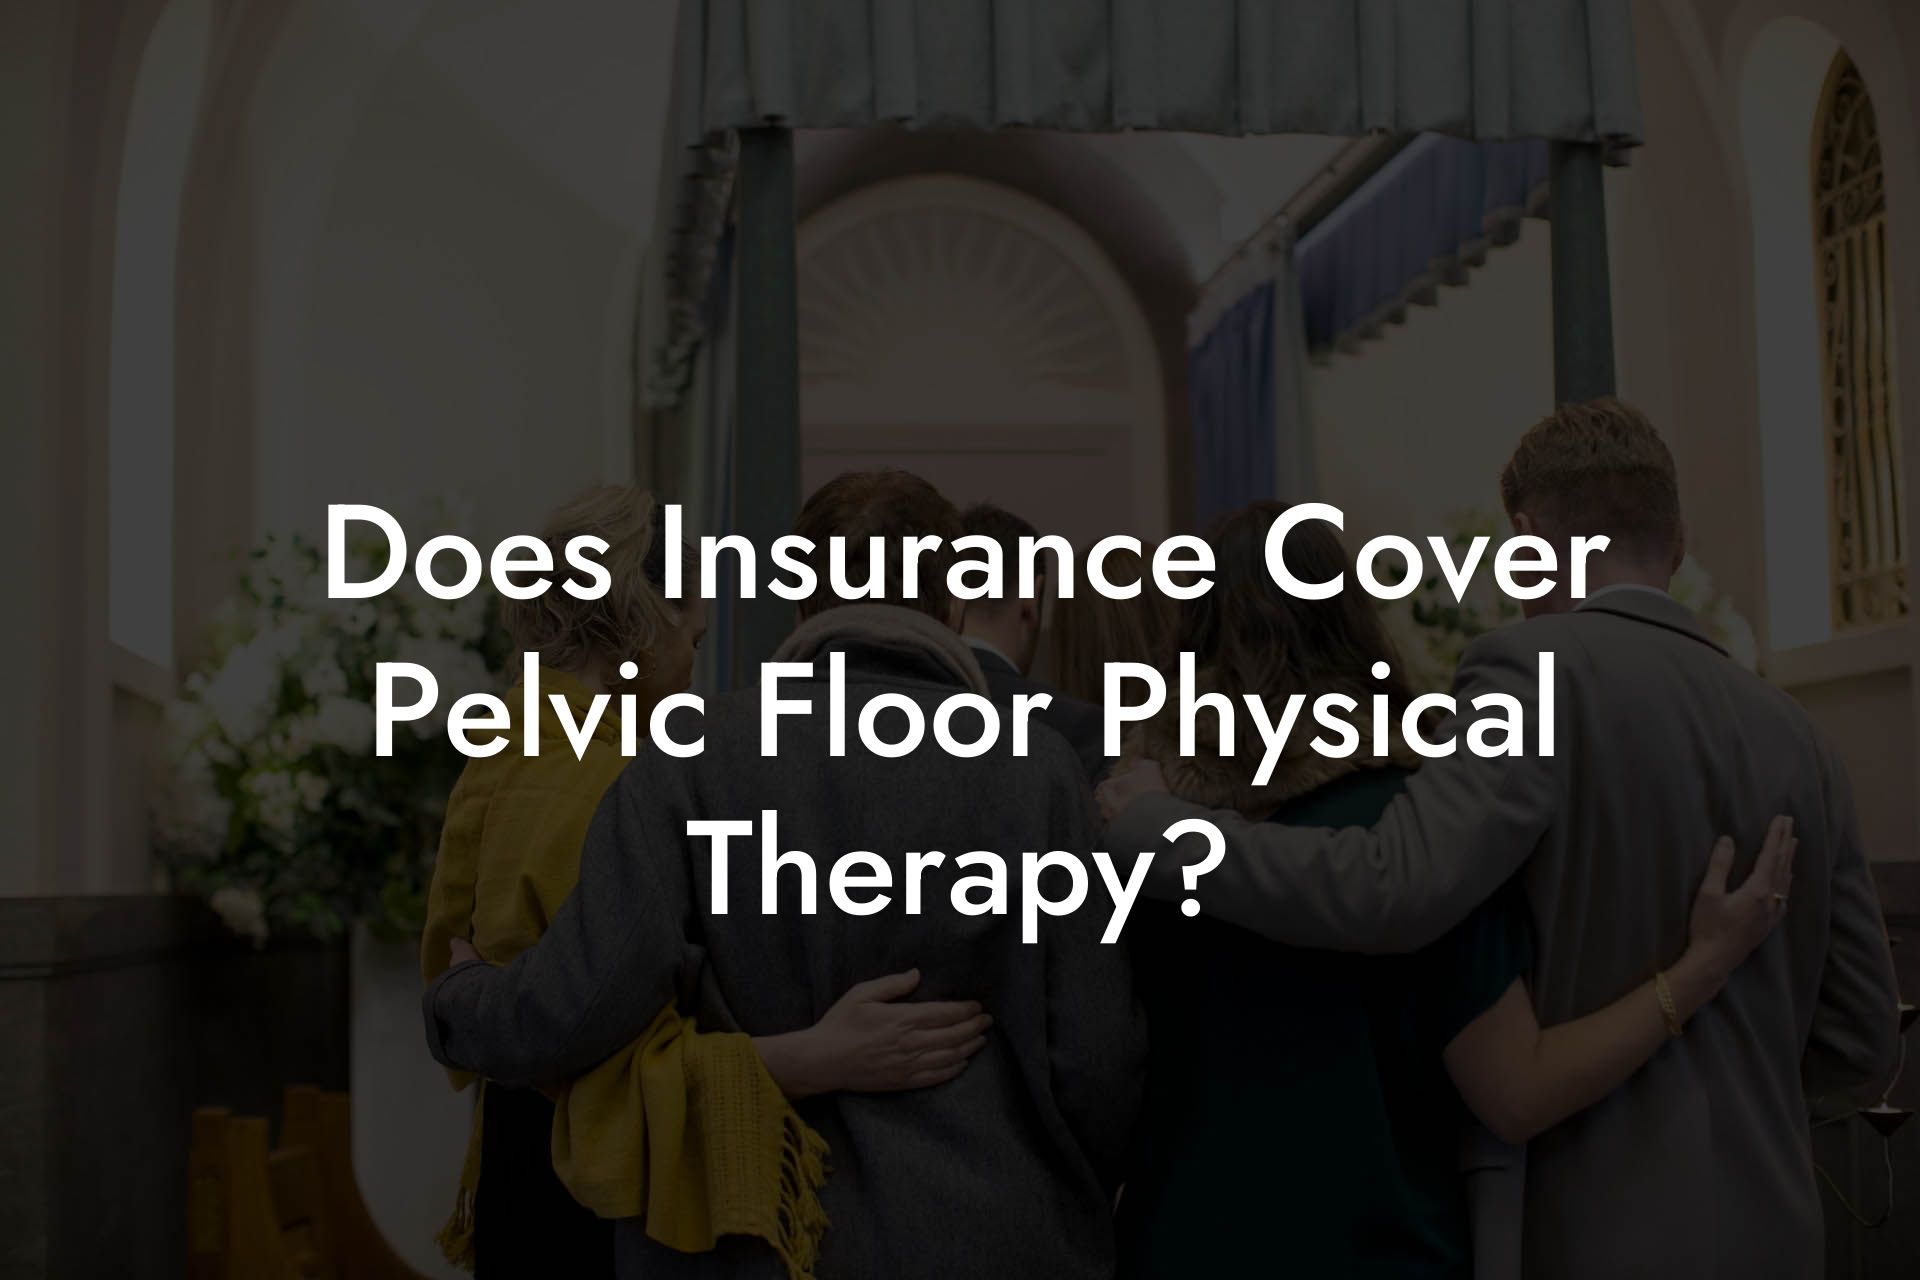 Does Insurance Cover Pelvic Floor Physical Therapy?